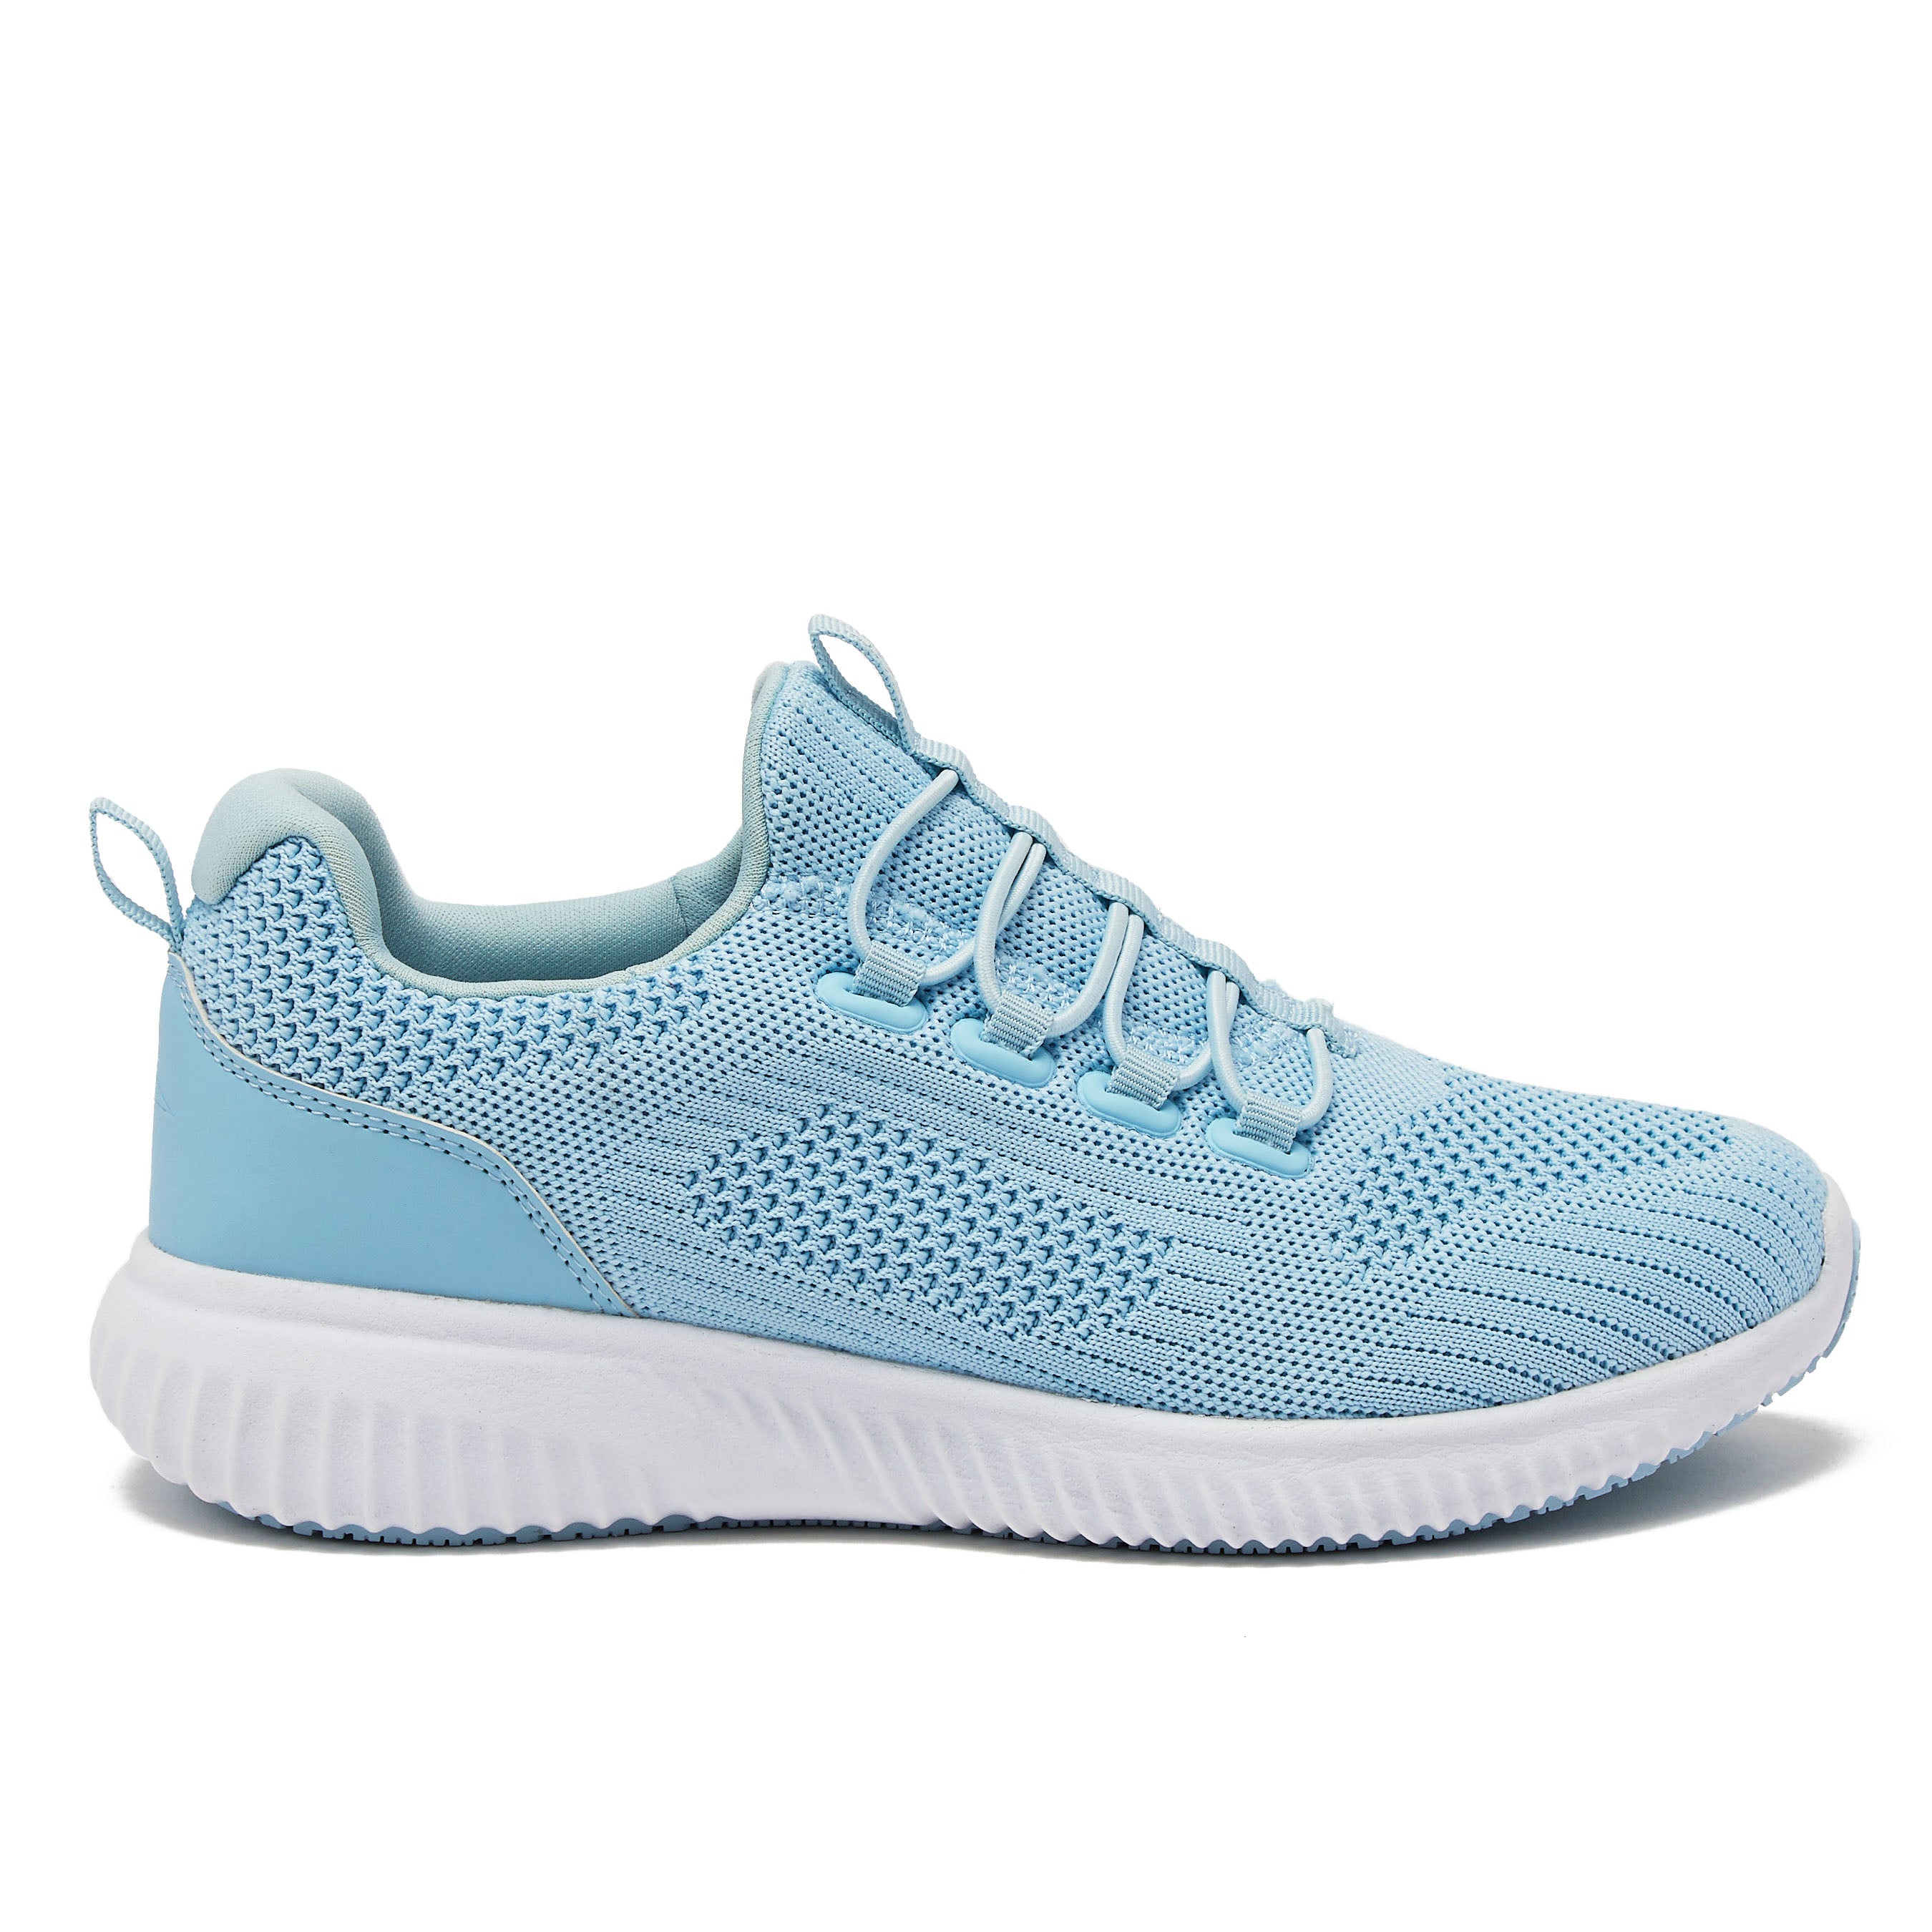 TOWED22 Womens Sneakers Womens Walking Shoes Slip on Comfortable Women  Sneakers with Elastic Strap(Blue,6.5) 